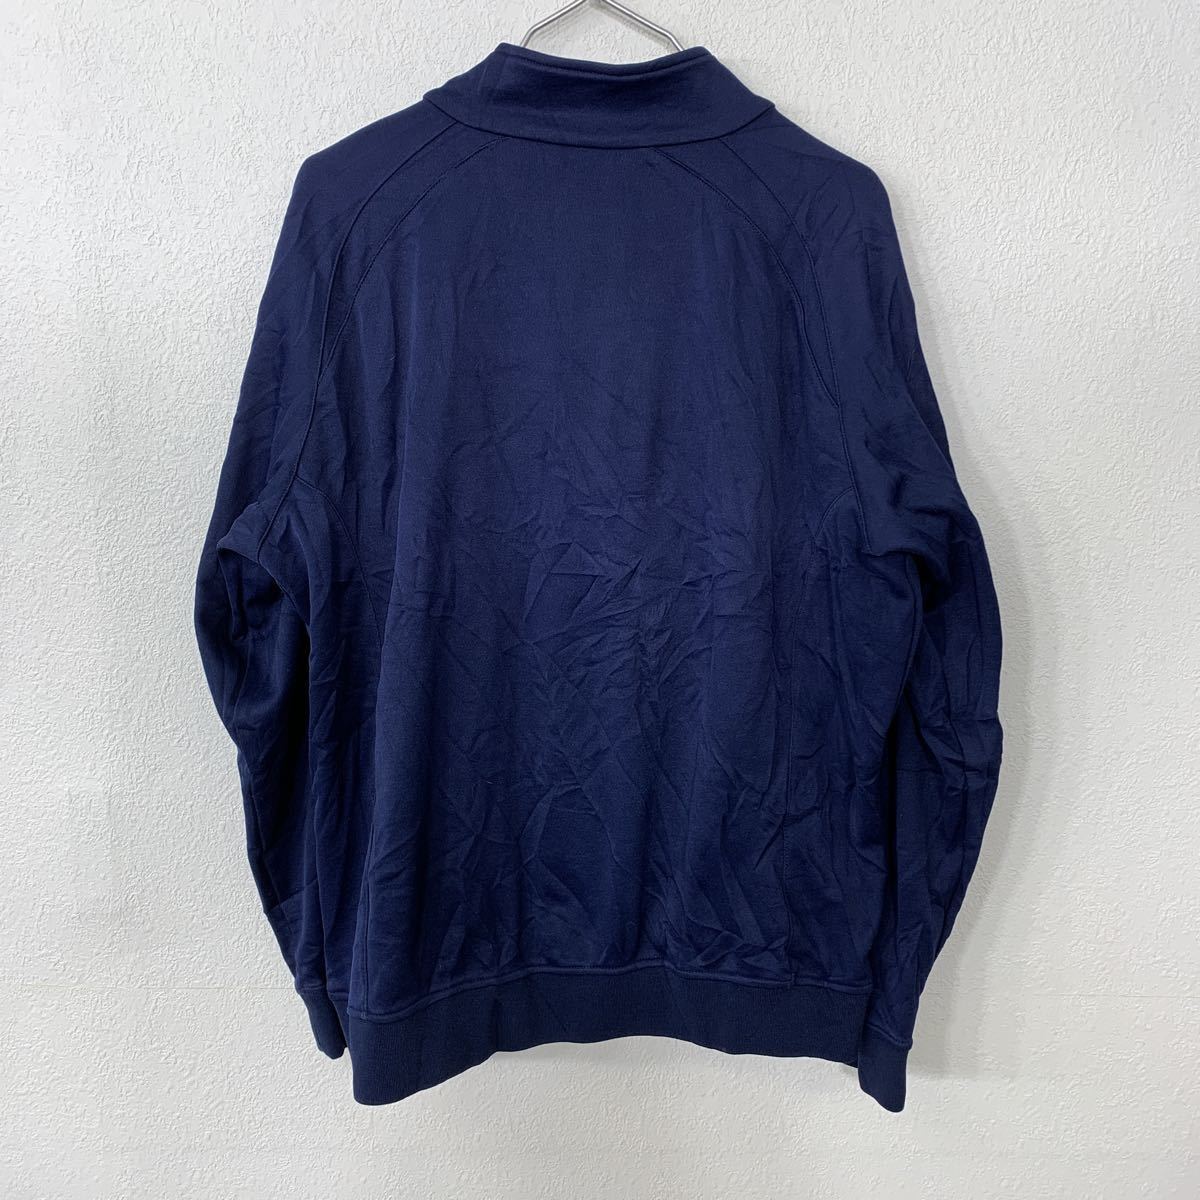 kaapa half Zip jersey L size copper jersey navy old clothes . America buying up t2110-3846